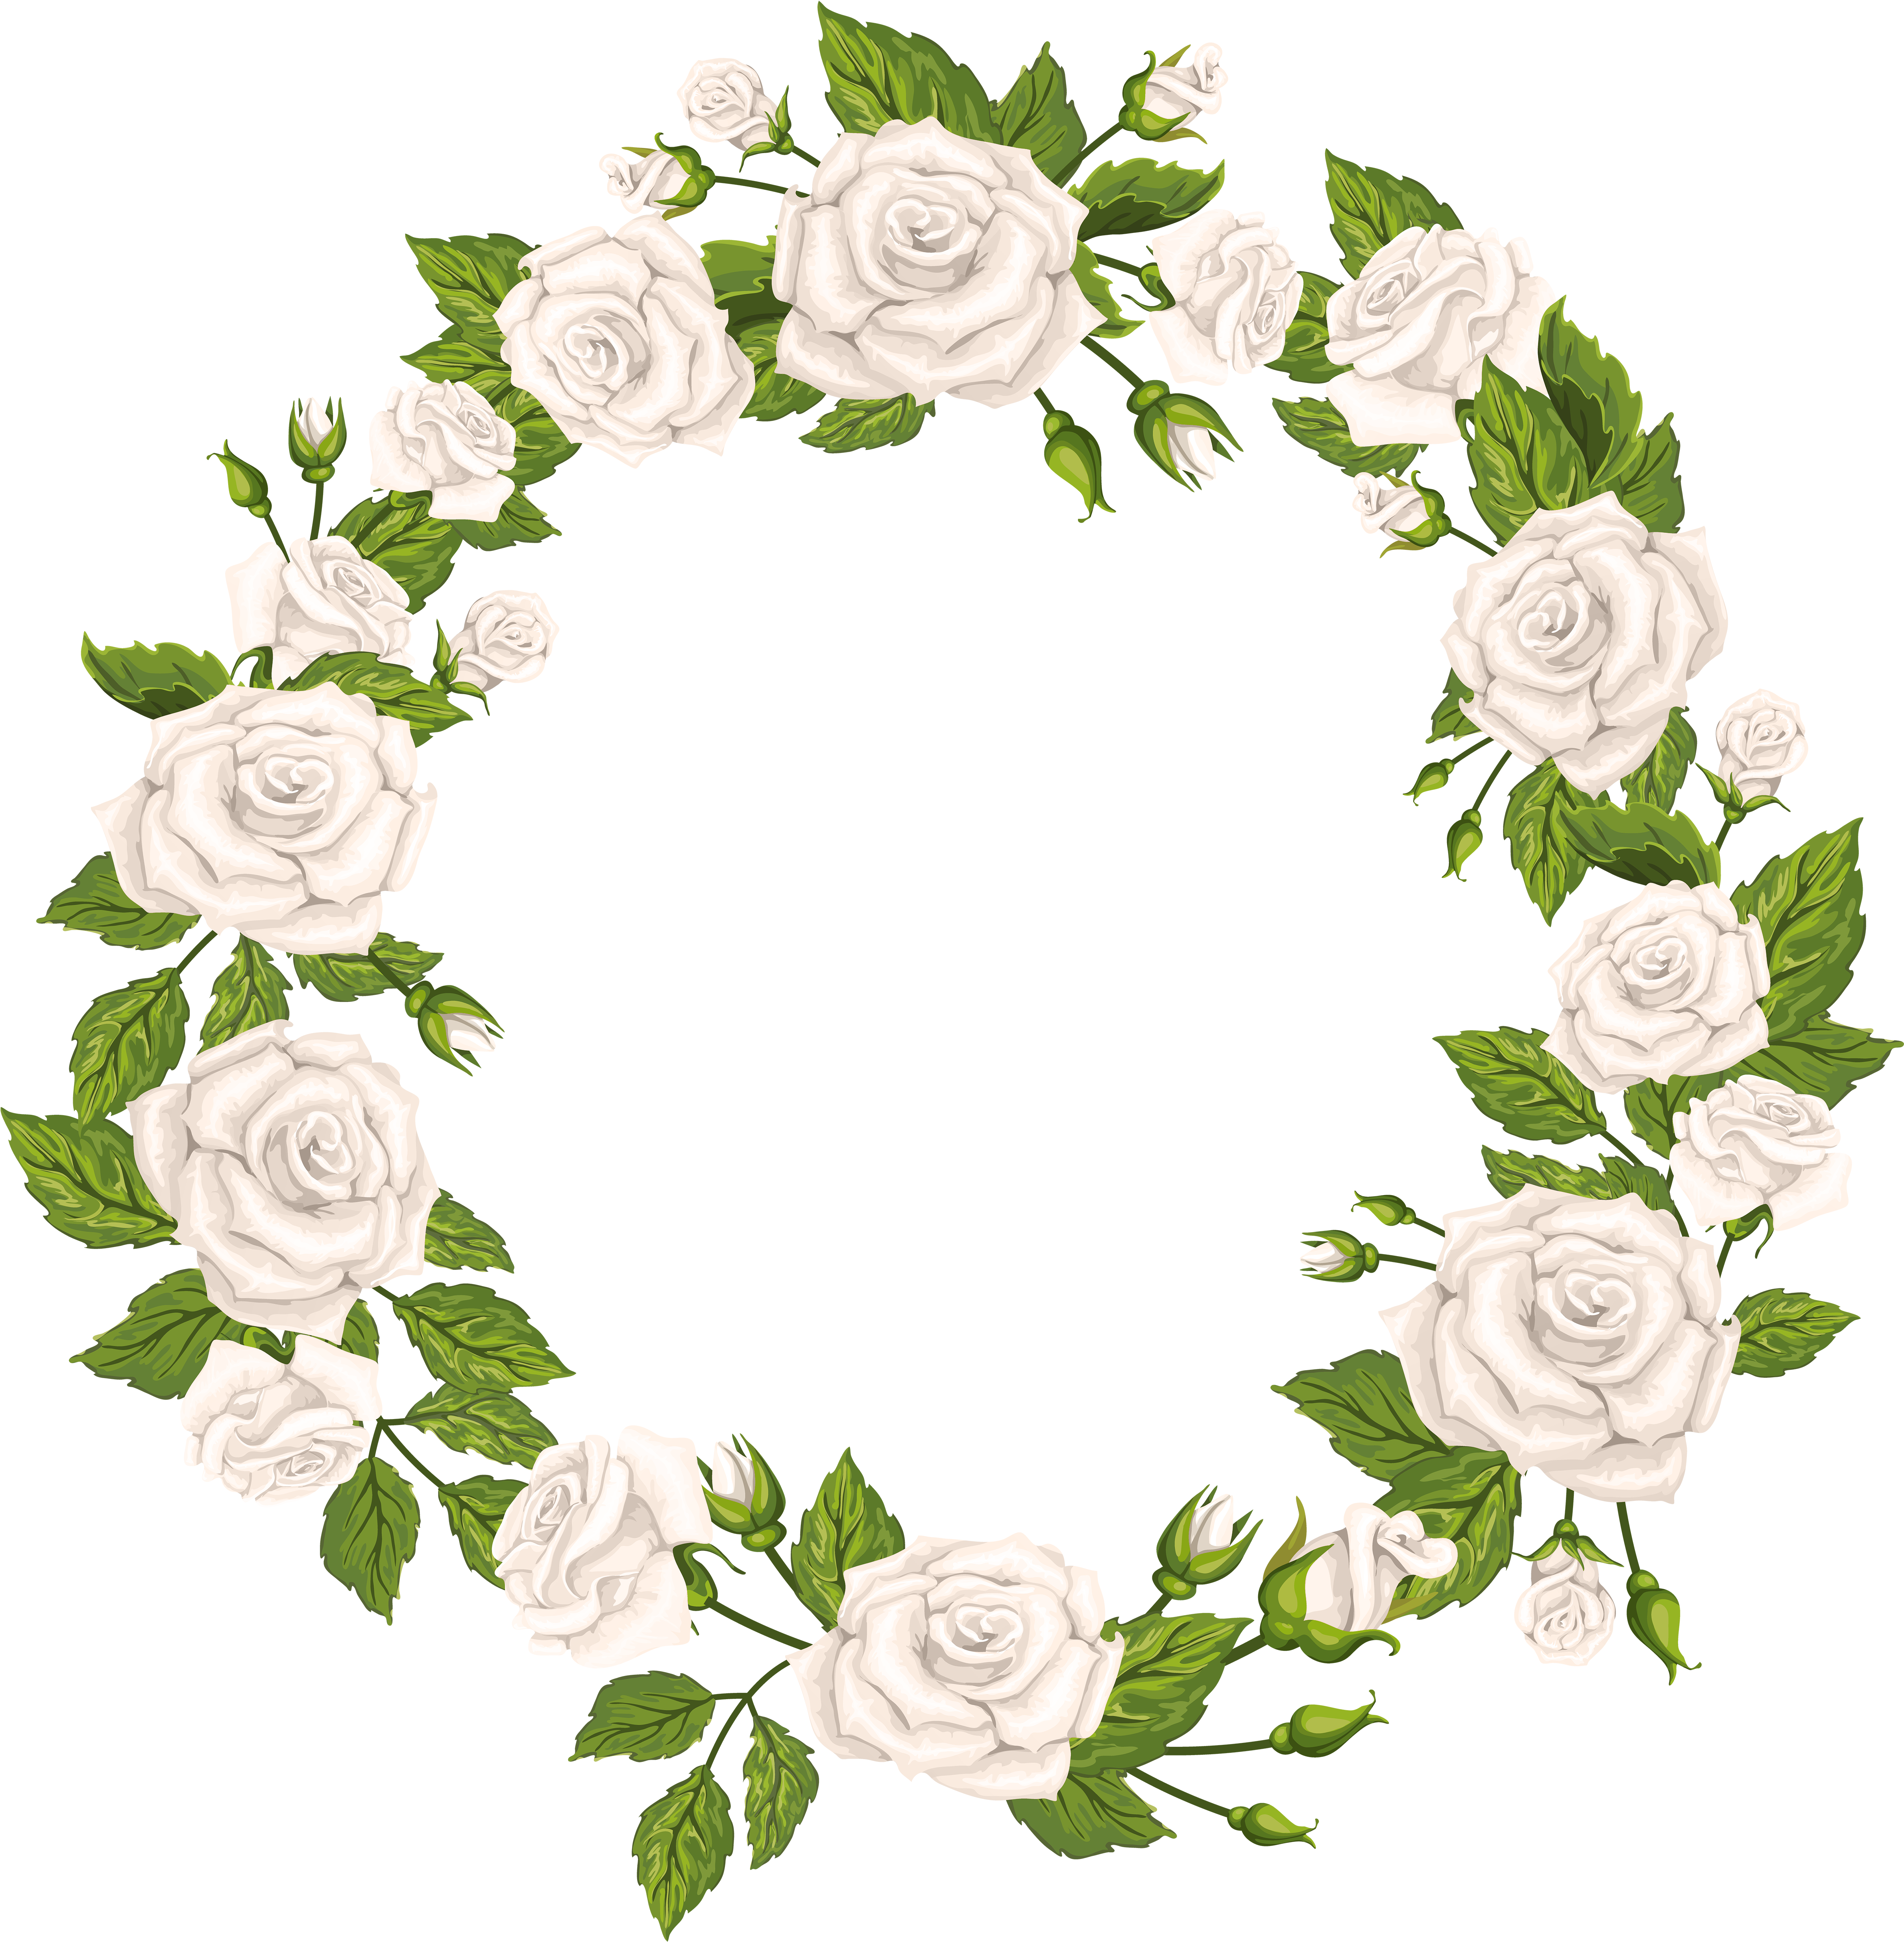 White Rose Wreath Png Clipart.